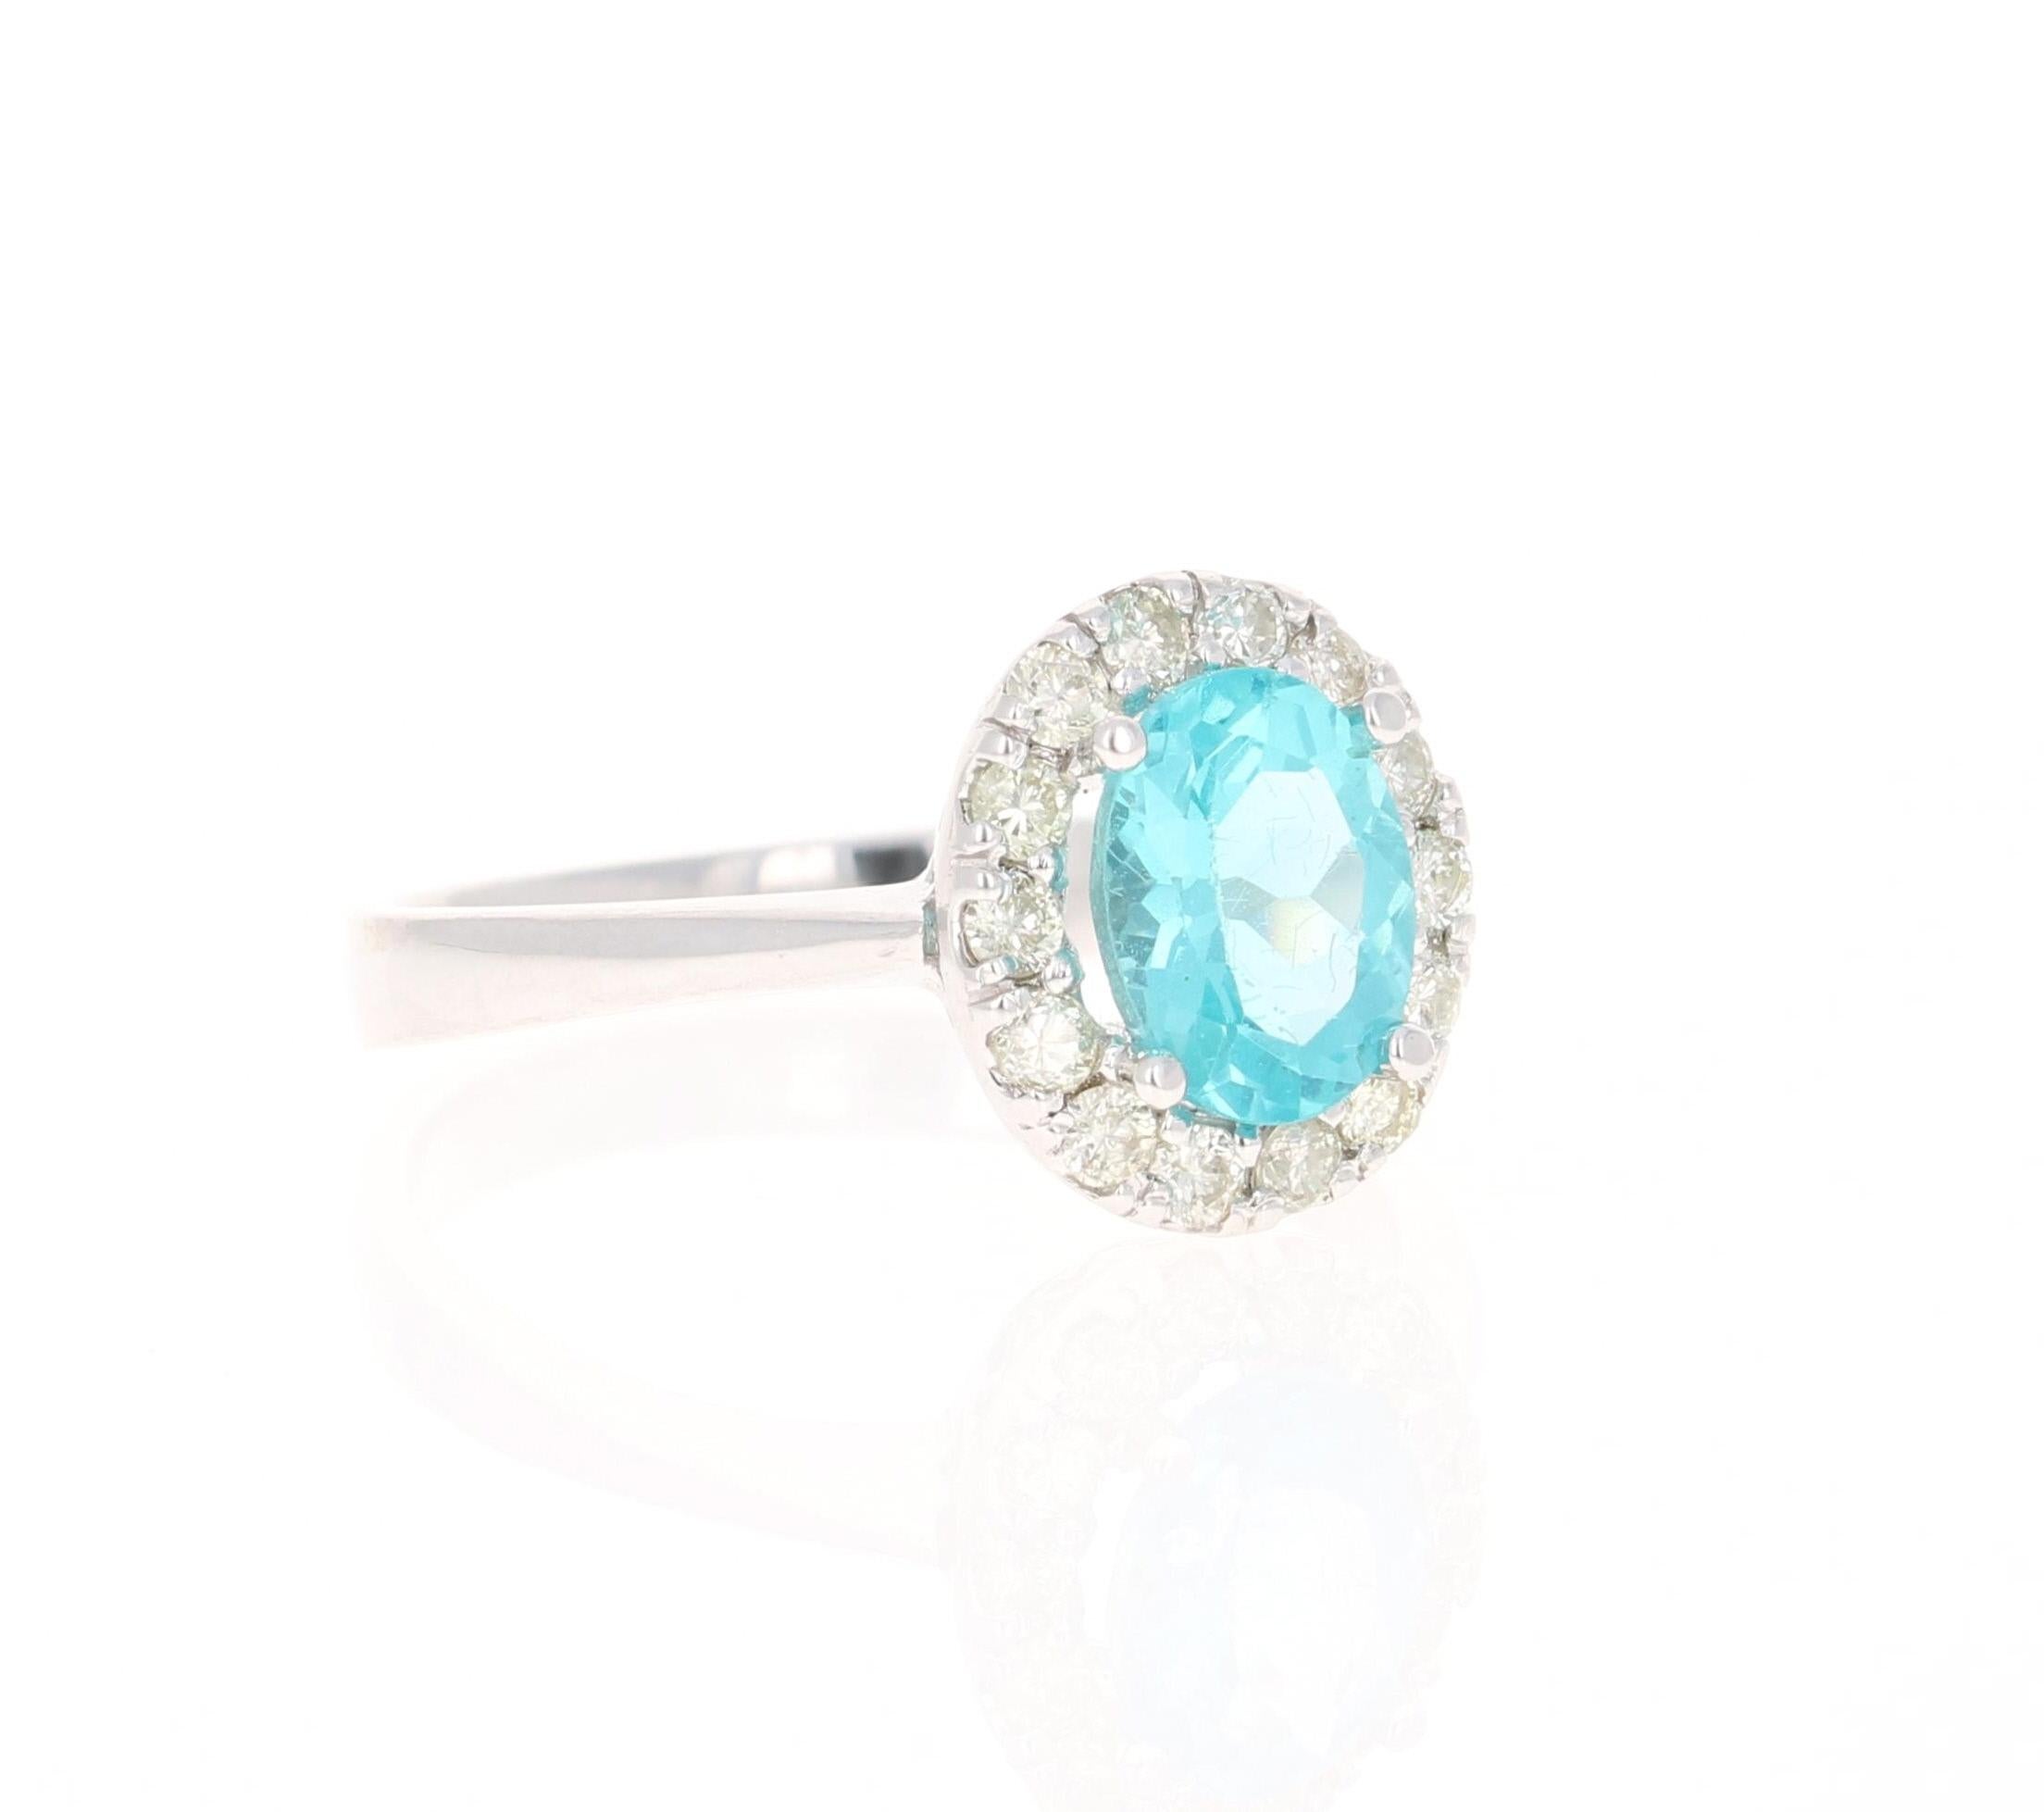 Gorgeous Halo Apatite and Diamond Ring. This ring has a Oval Cut 1.39 carat Apatite in the center of the ring and is surrounded by a halo of 14 Round Cut Diamonds that weigh 0.36 carat (Clarity: SI, Color:F). The total carat weight of the ring is